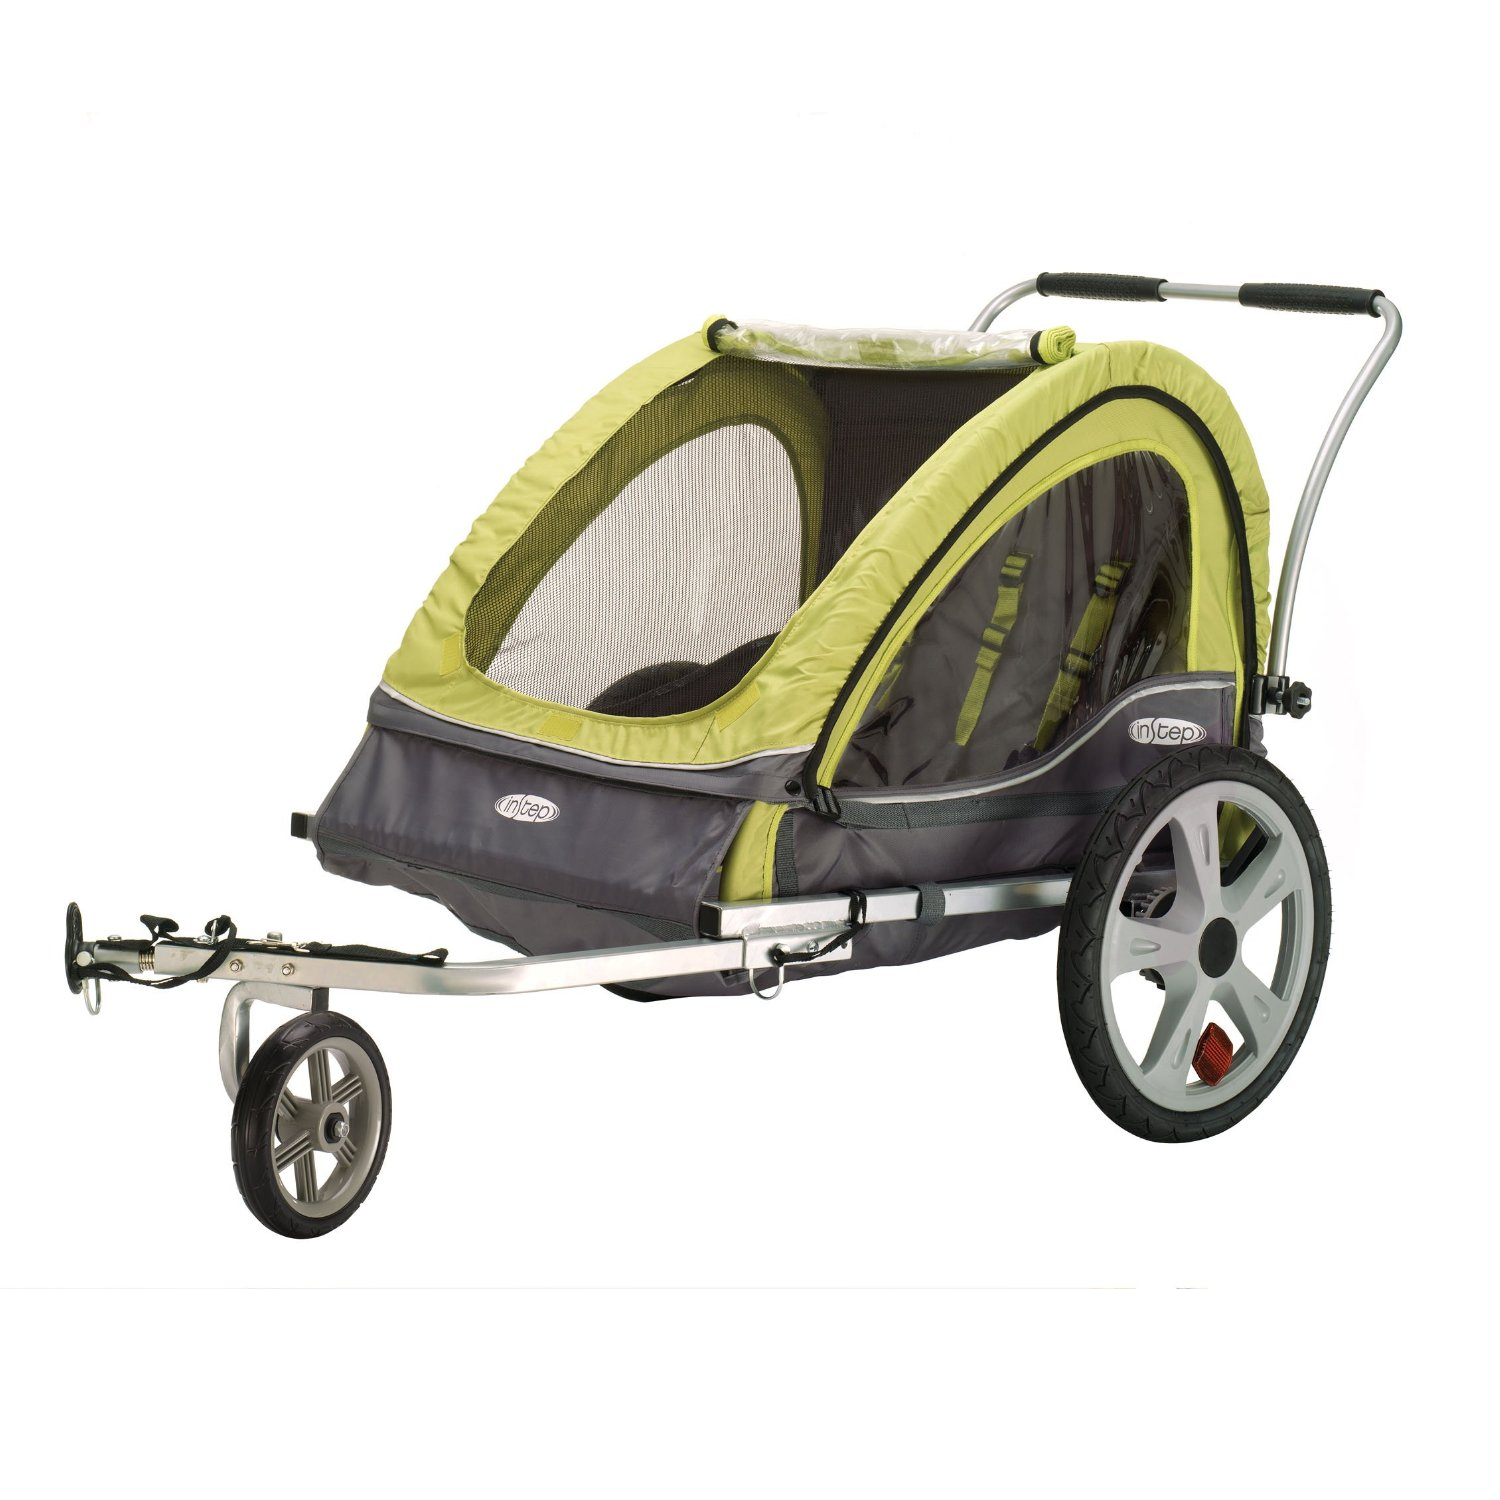 Save 64% Off The InStep Sierra Double Bicycle Trailer – Only $67.67 Shipped!